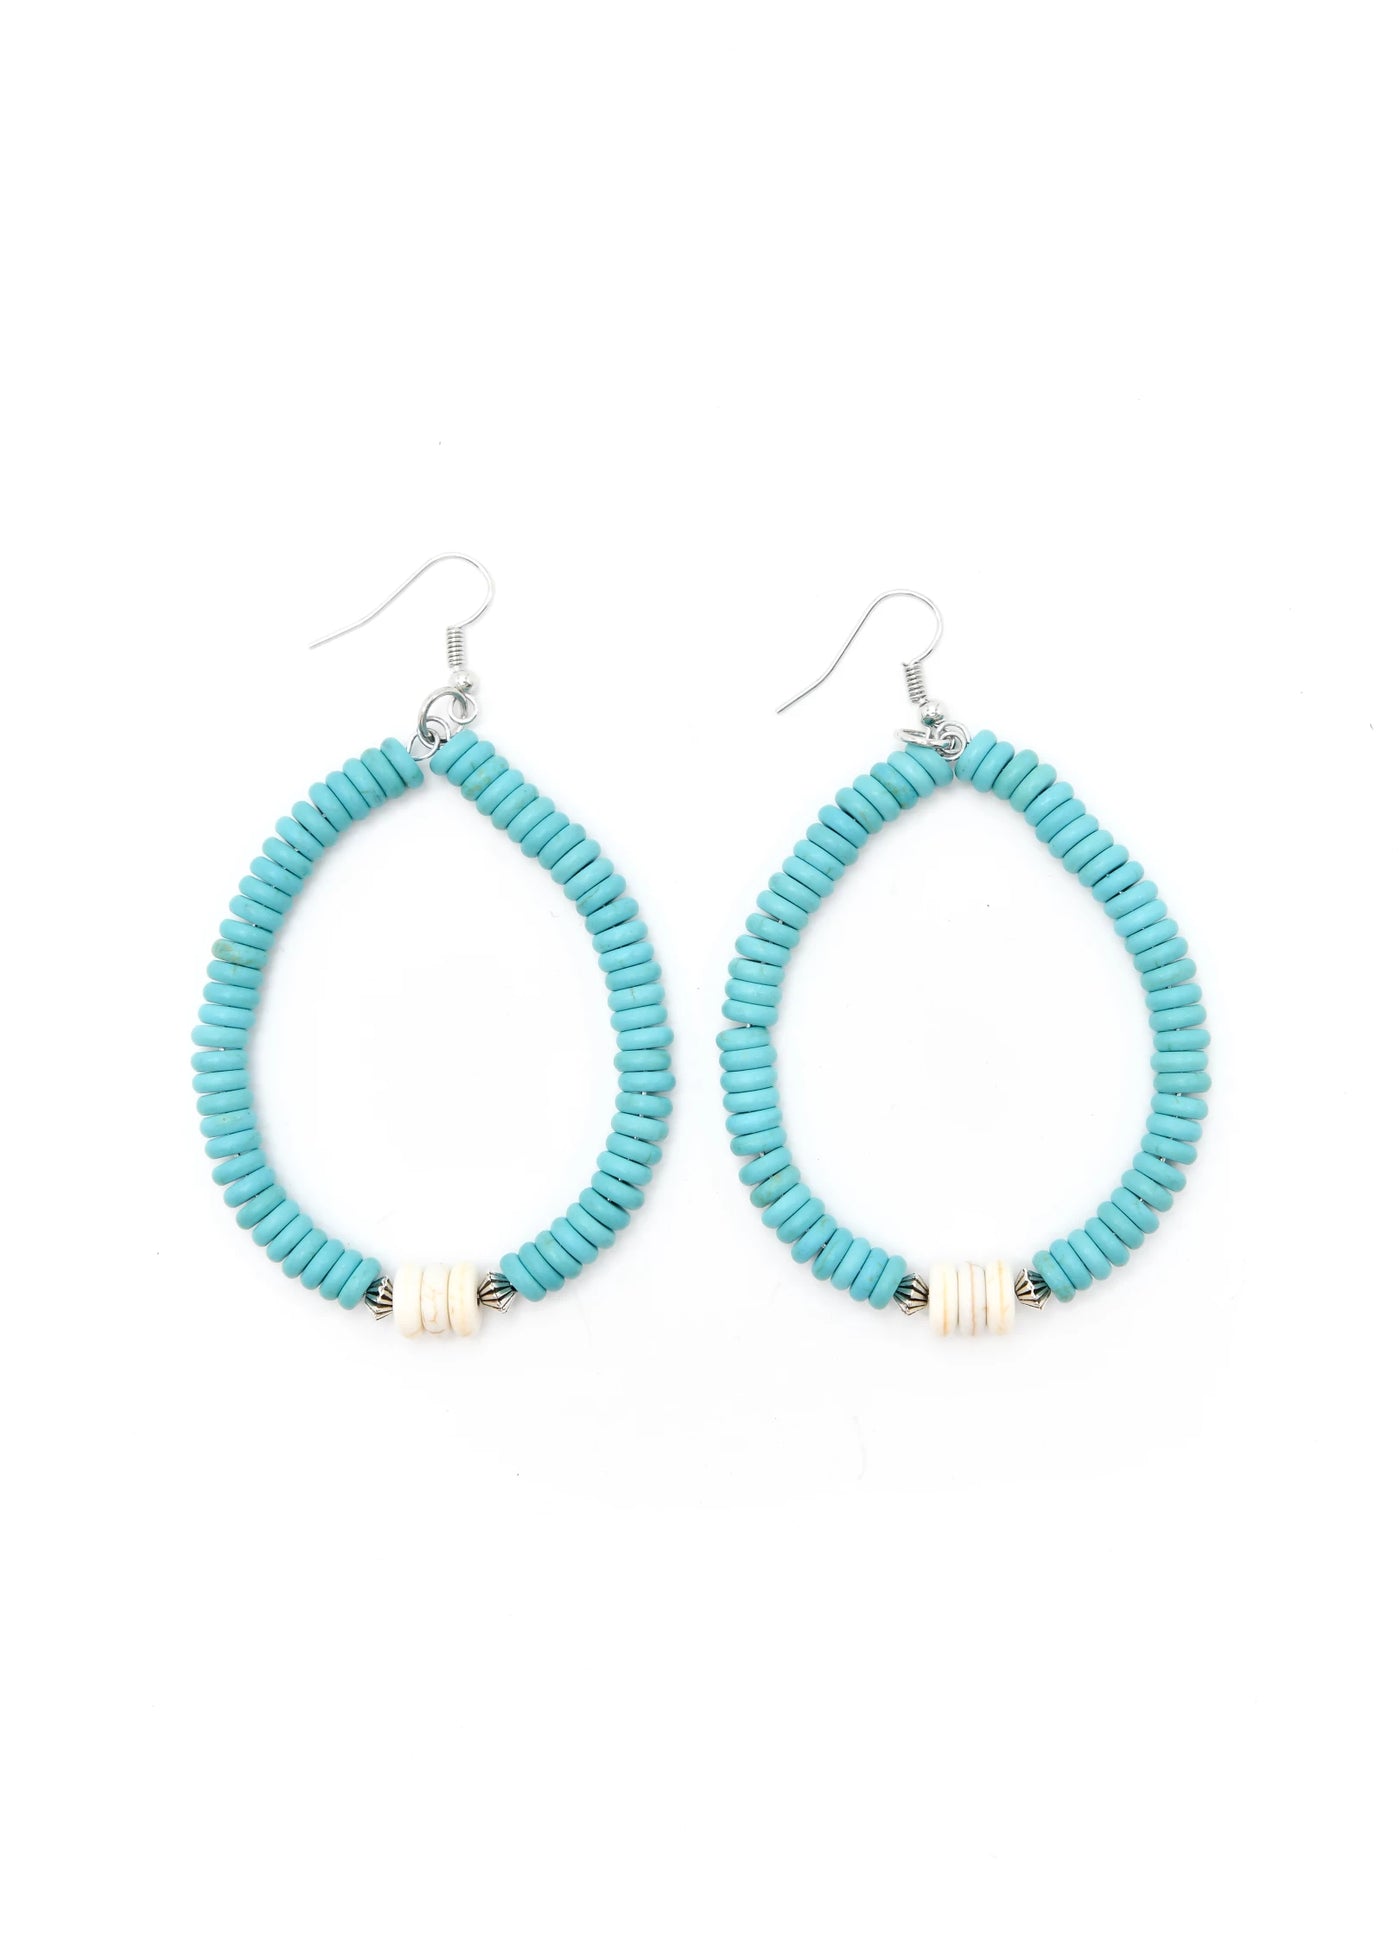 Turquoise and Ivory Beaded Teardrop Earring on Fishook